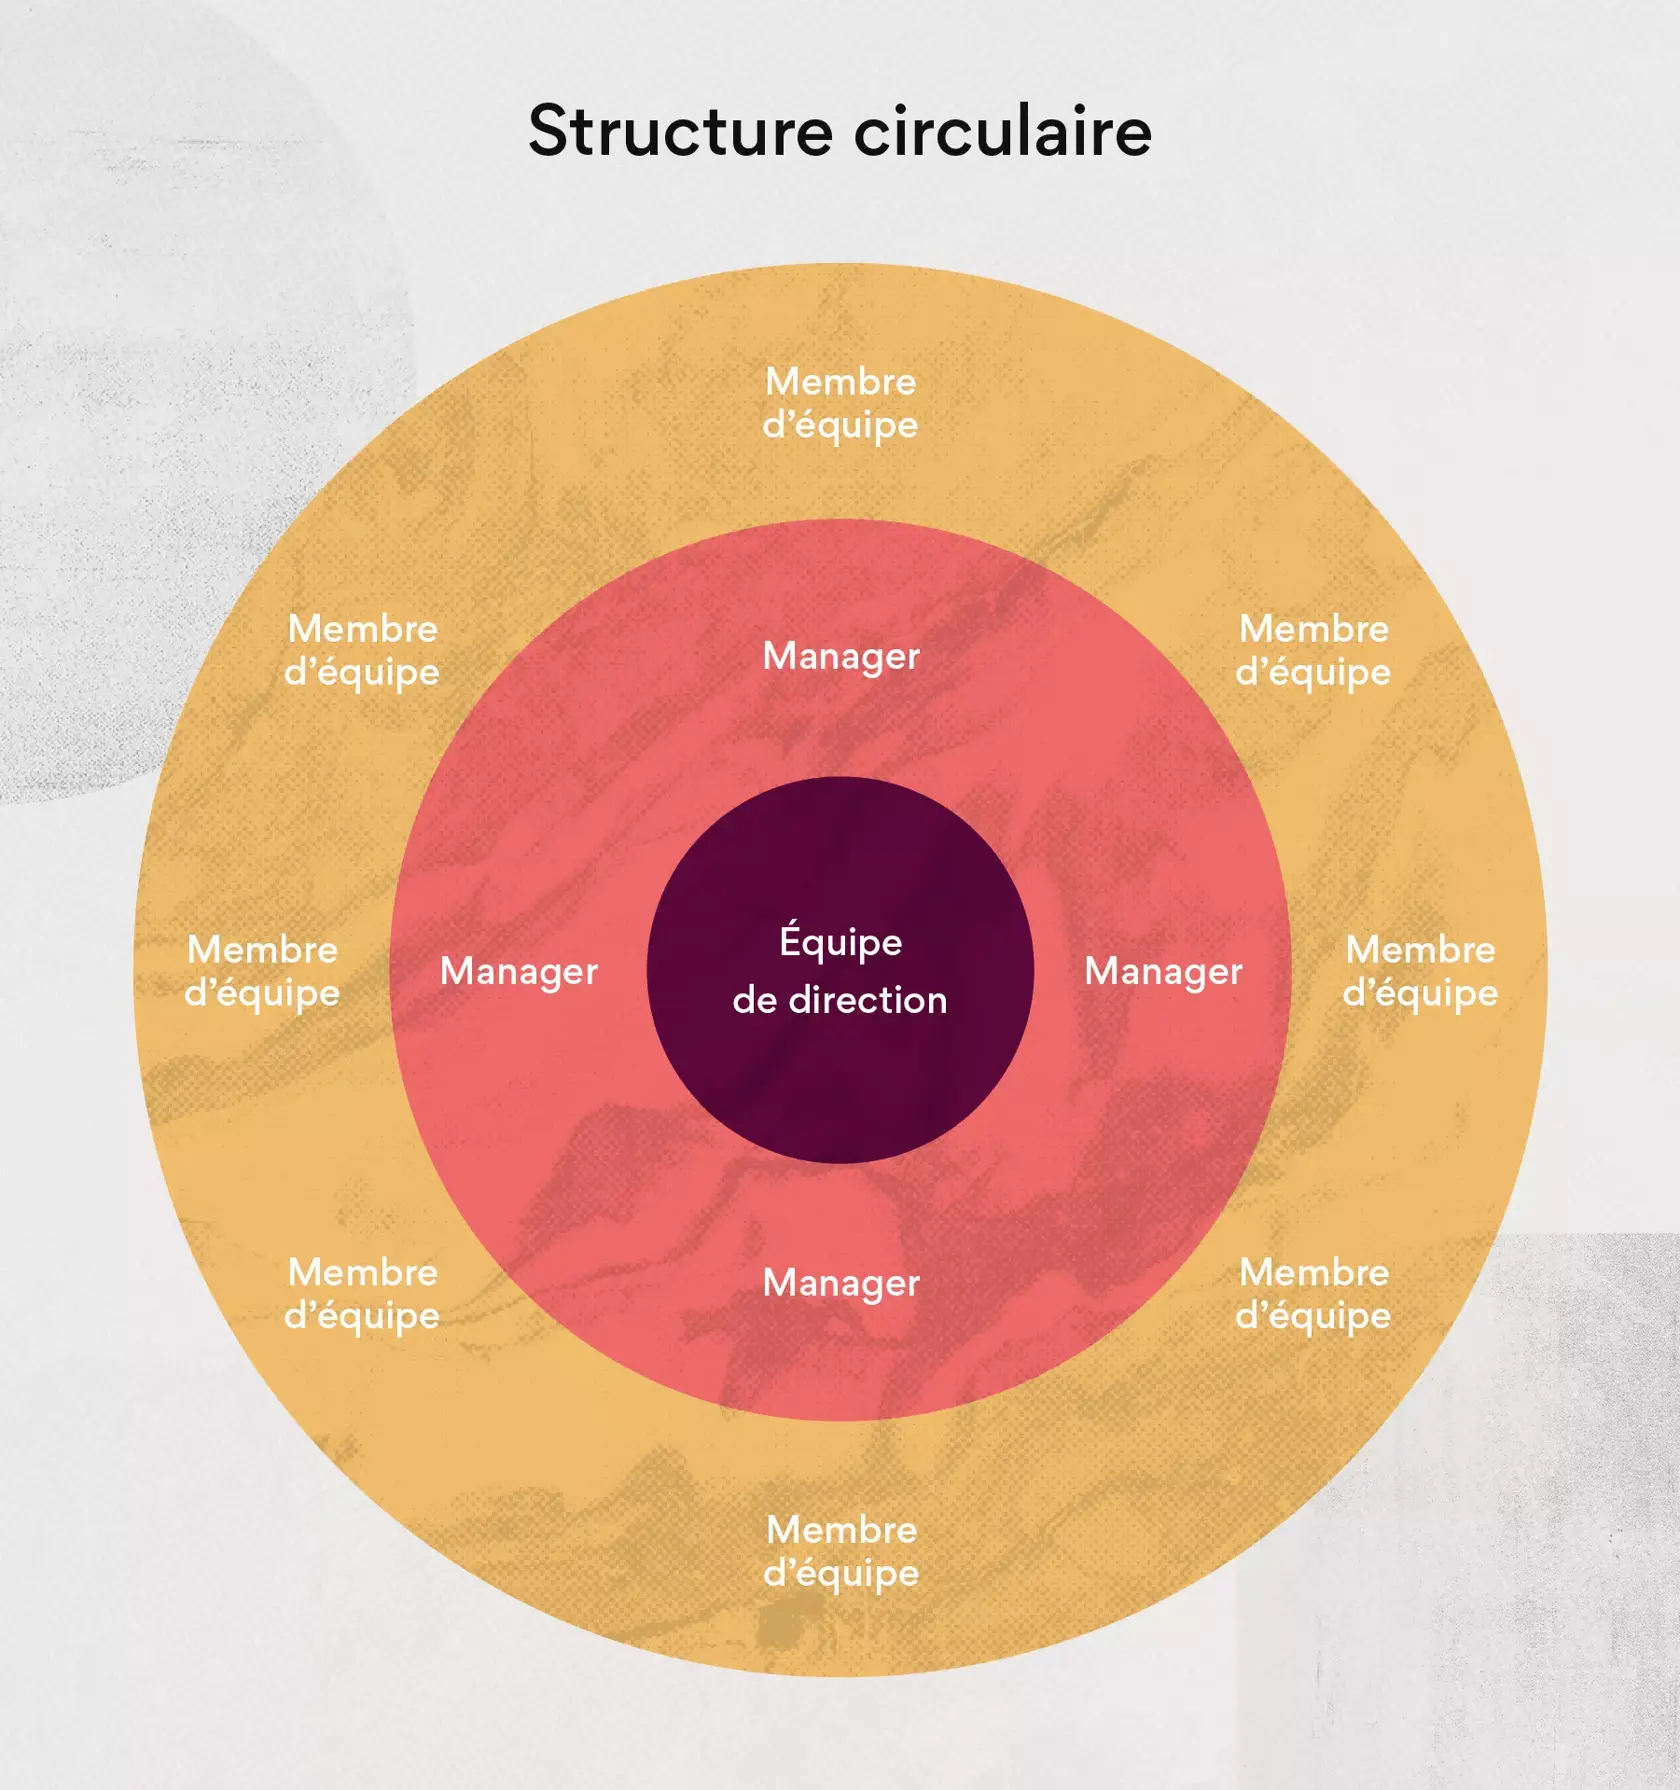 Structure circulaire